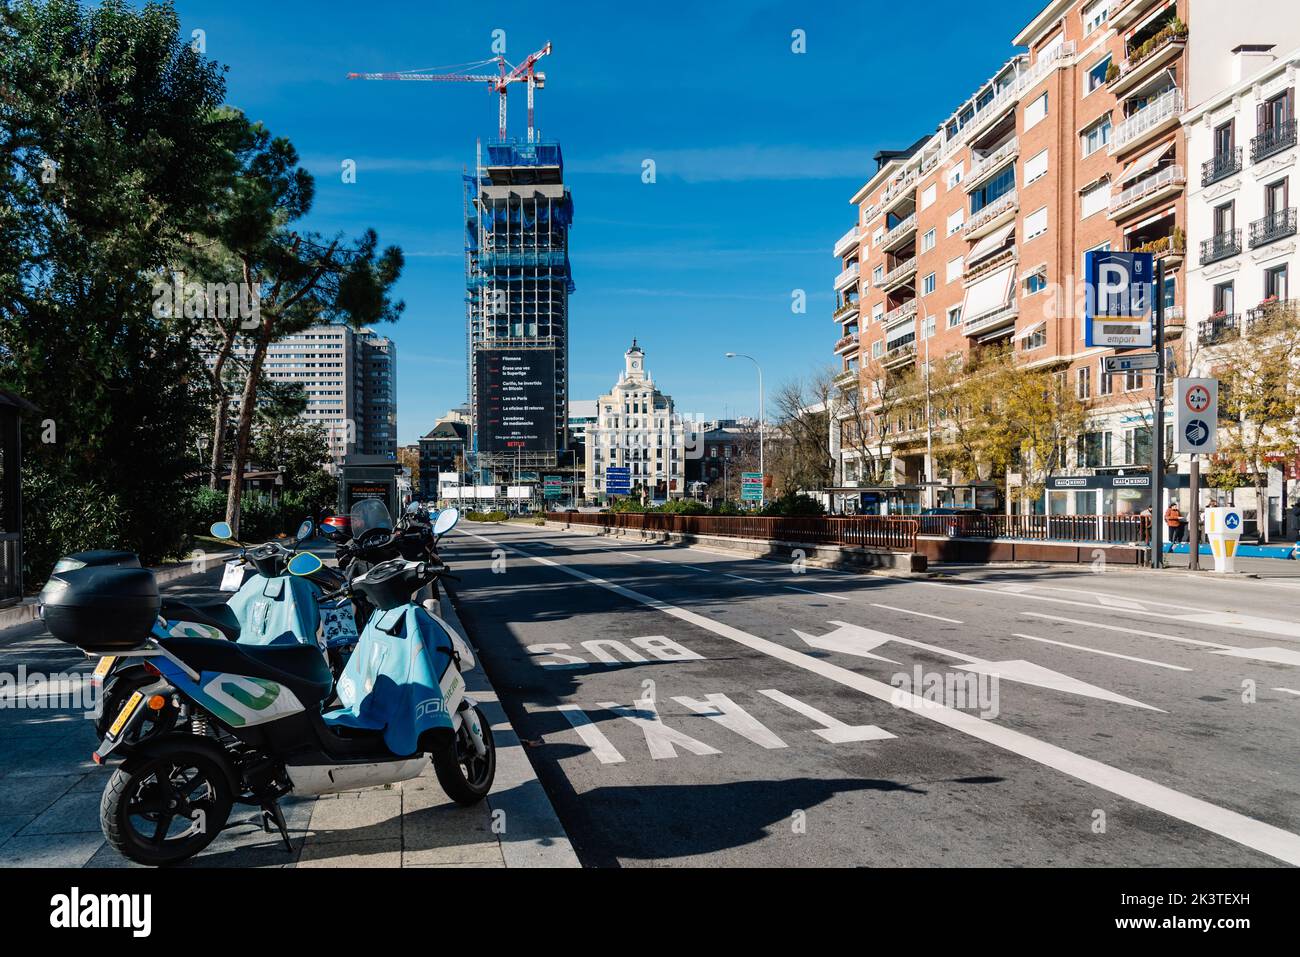 Madrid, Spain - December 12, 2021: Colon Square in central Madrid. View of Goya Street and Colon Towers under renovation Stock Photo